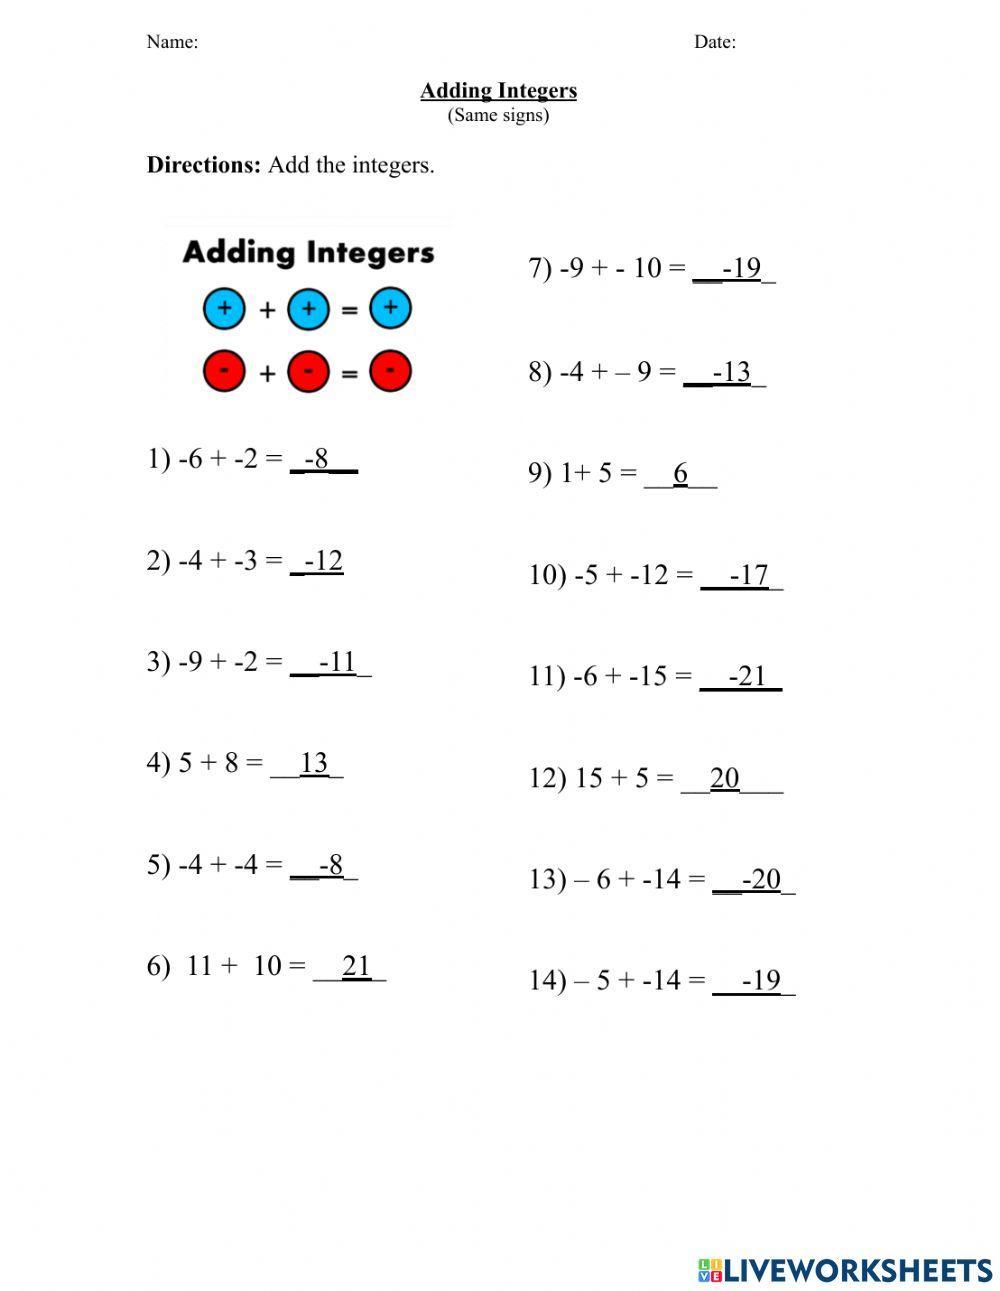 Adding Integers with Same Signs